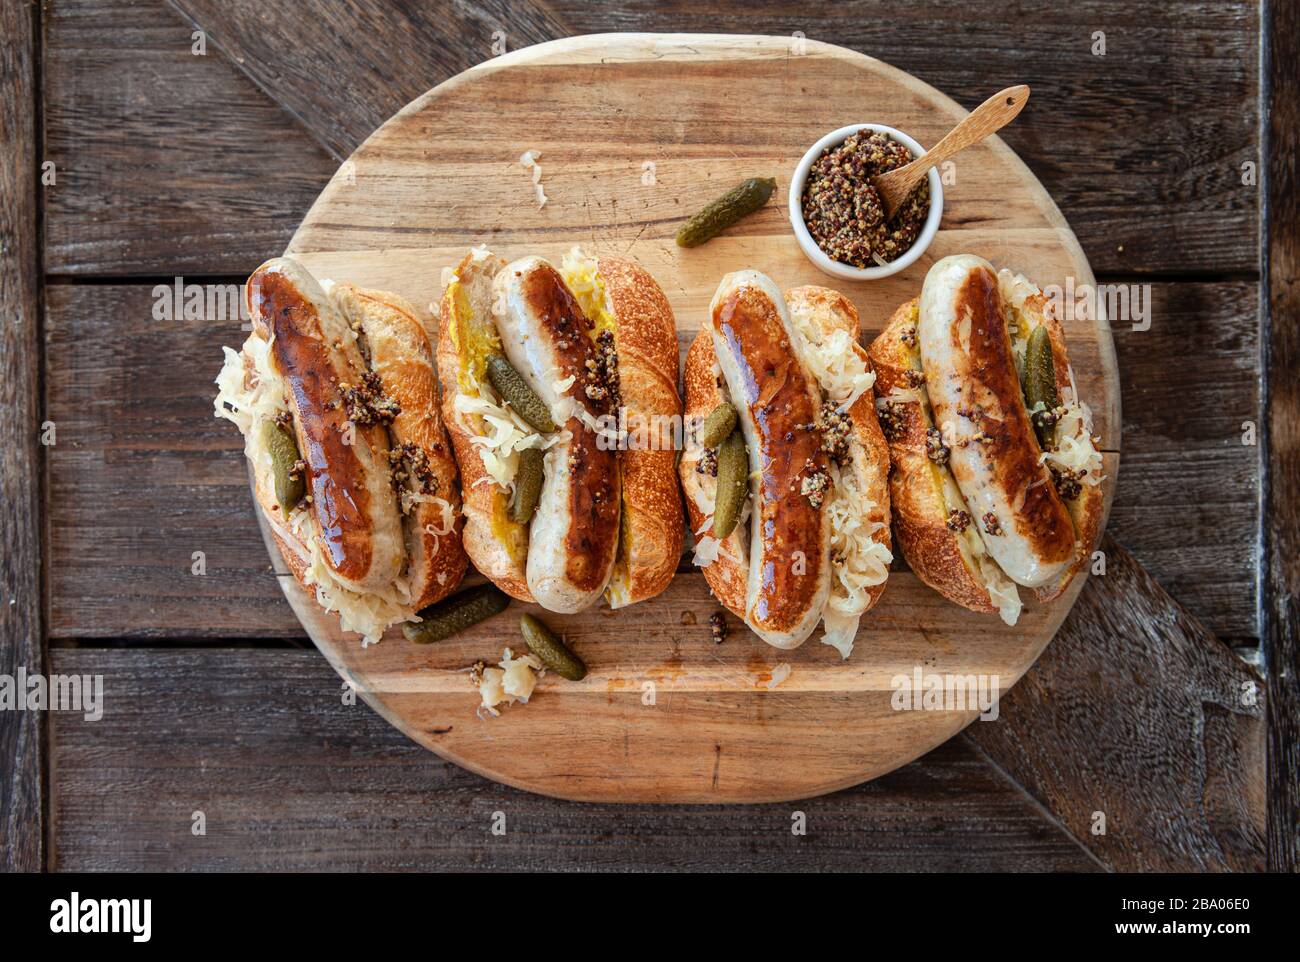 Delicious pork sausage hot dogs with sauerkraut and mustard Stock Photo